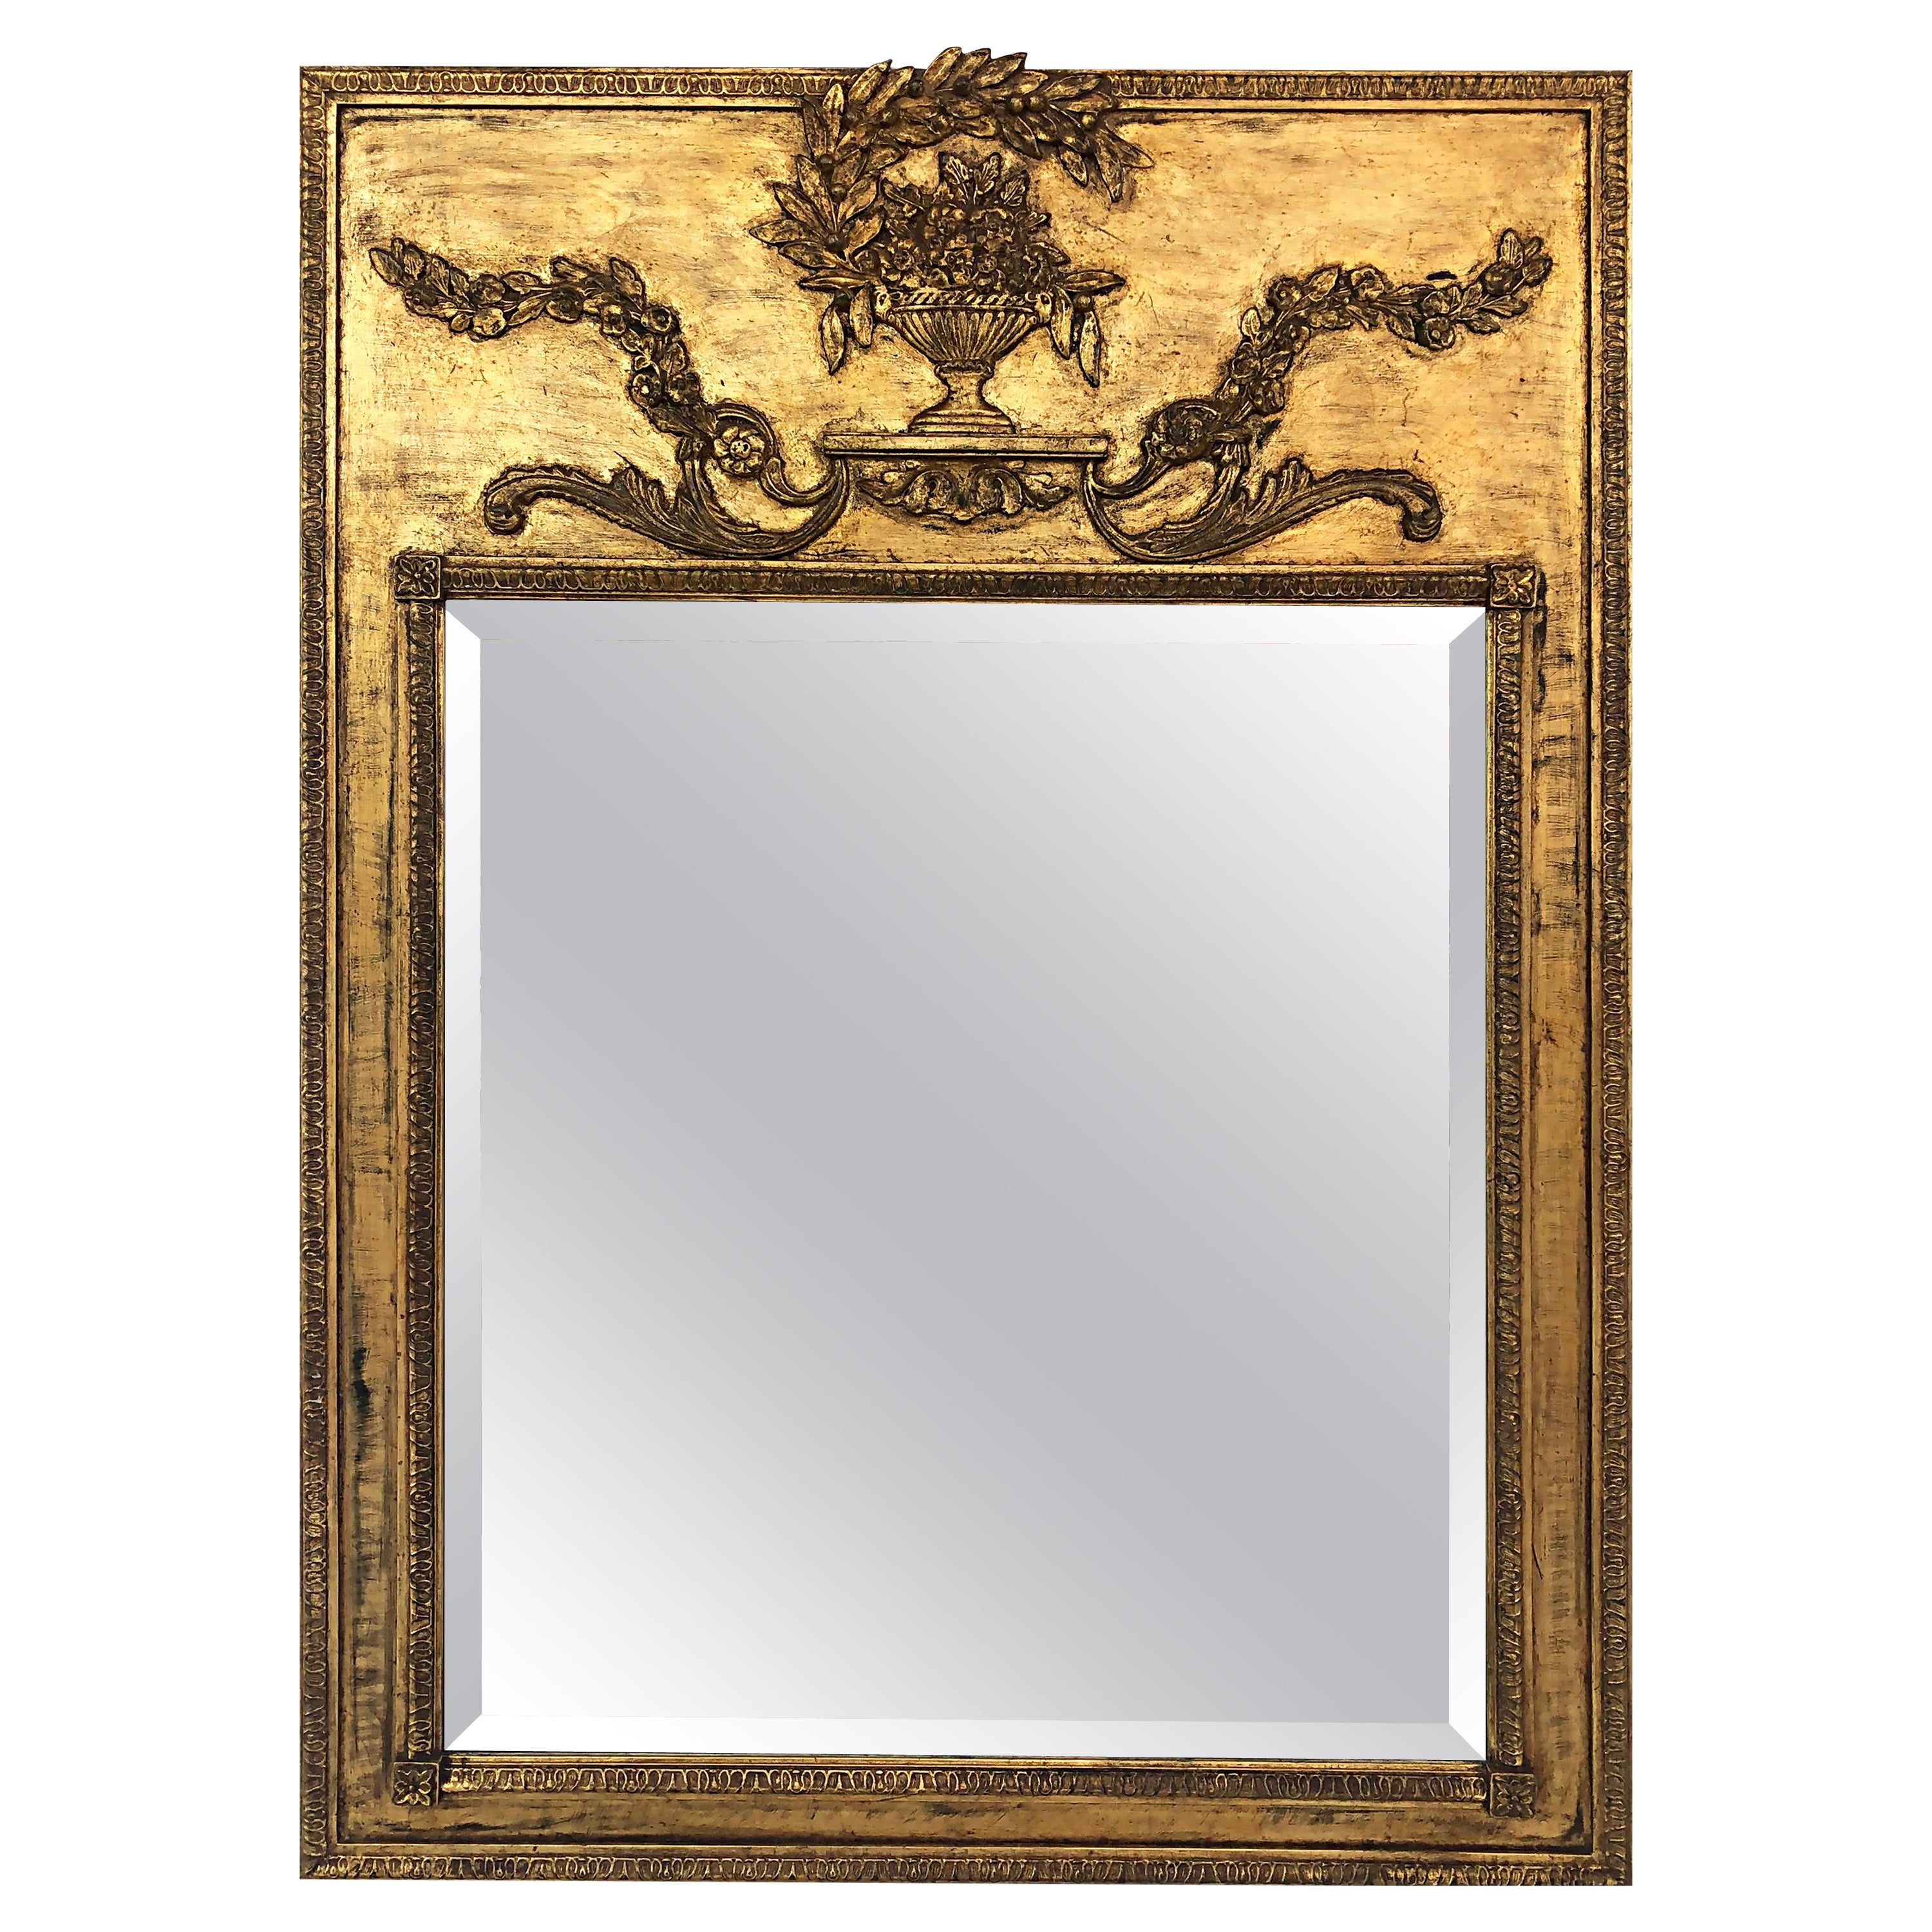 Vintage Gilt-Wood Mantel Fireplace Bevelled Mirror, French Style